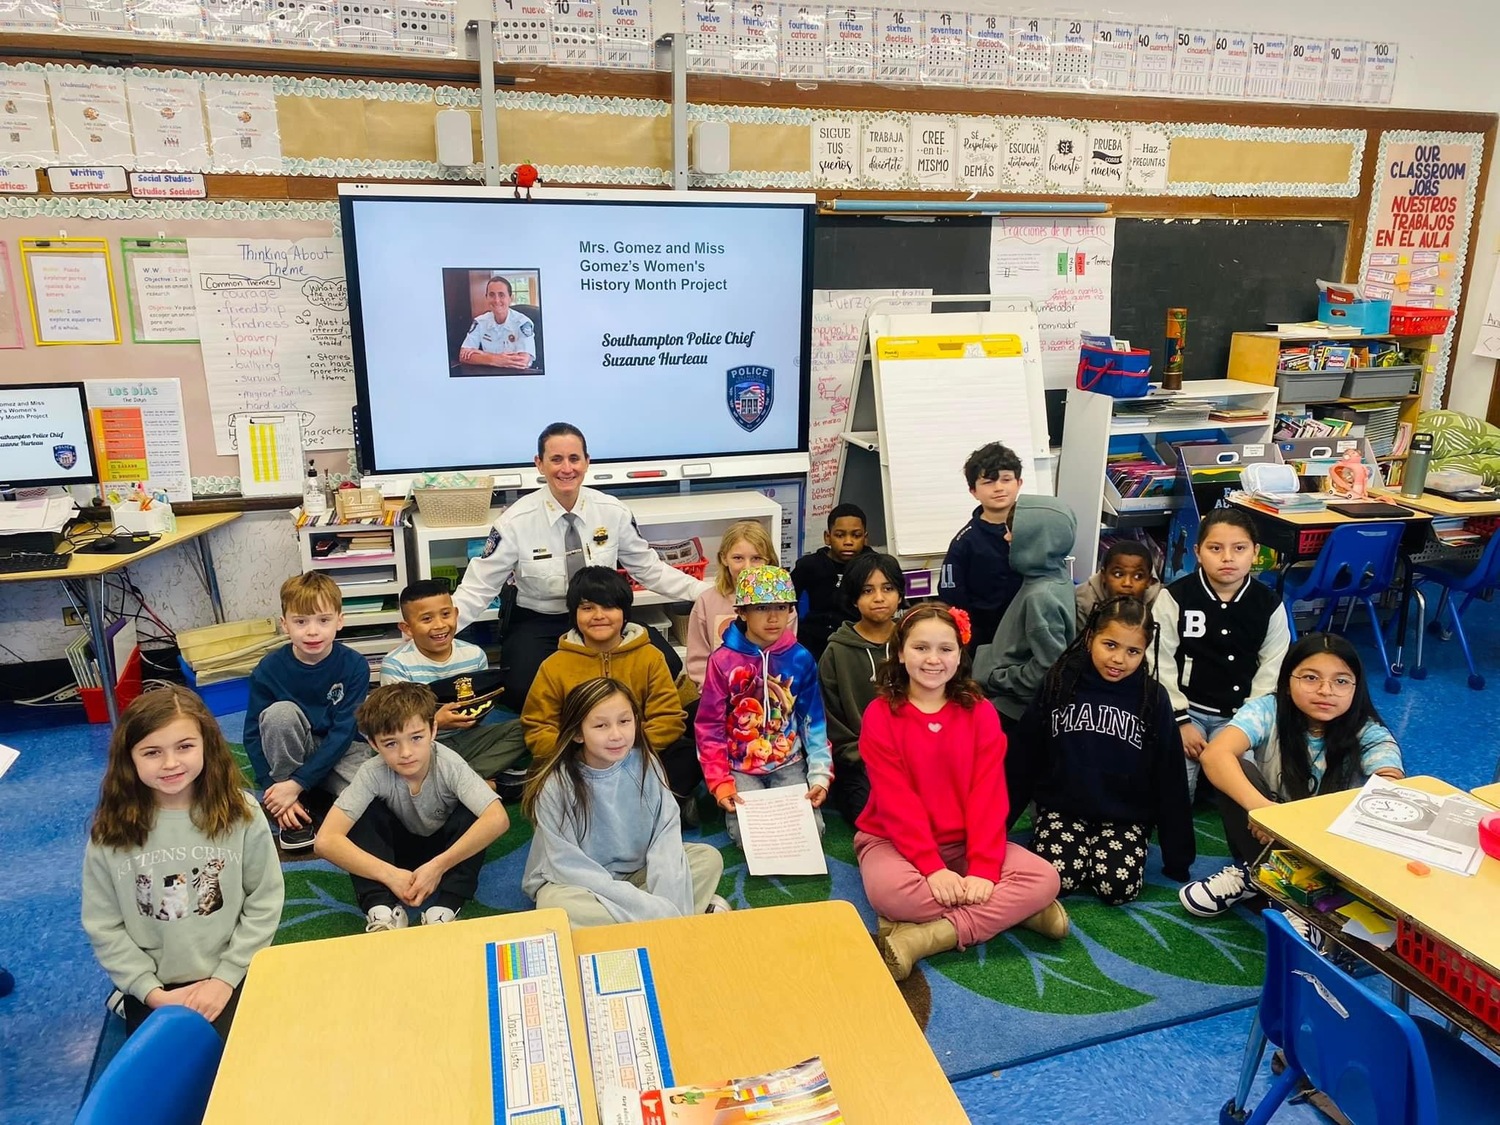 As part of a Women’s History Month celebration, Southampton Elementary School third grade students in Jessica Gomez's​ and Stefany Gomez-Barrientos’ class had a visit from Southampton Village Police Chief Suzanne Hurteau. During the visit, they learned that Chief Hurteau was the first female detective, the first female sergeant and the first female lieutenant before becoming the first female police chief in the department’s 127-year history. Prior to the visit, the students had been presenting information about important women during their school’s morning announcements. COURTESY SOUTHAMPTON SCHOOL DISTRICT